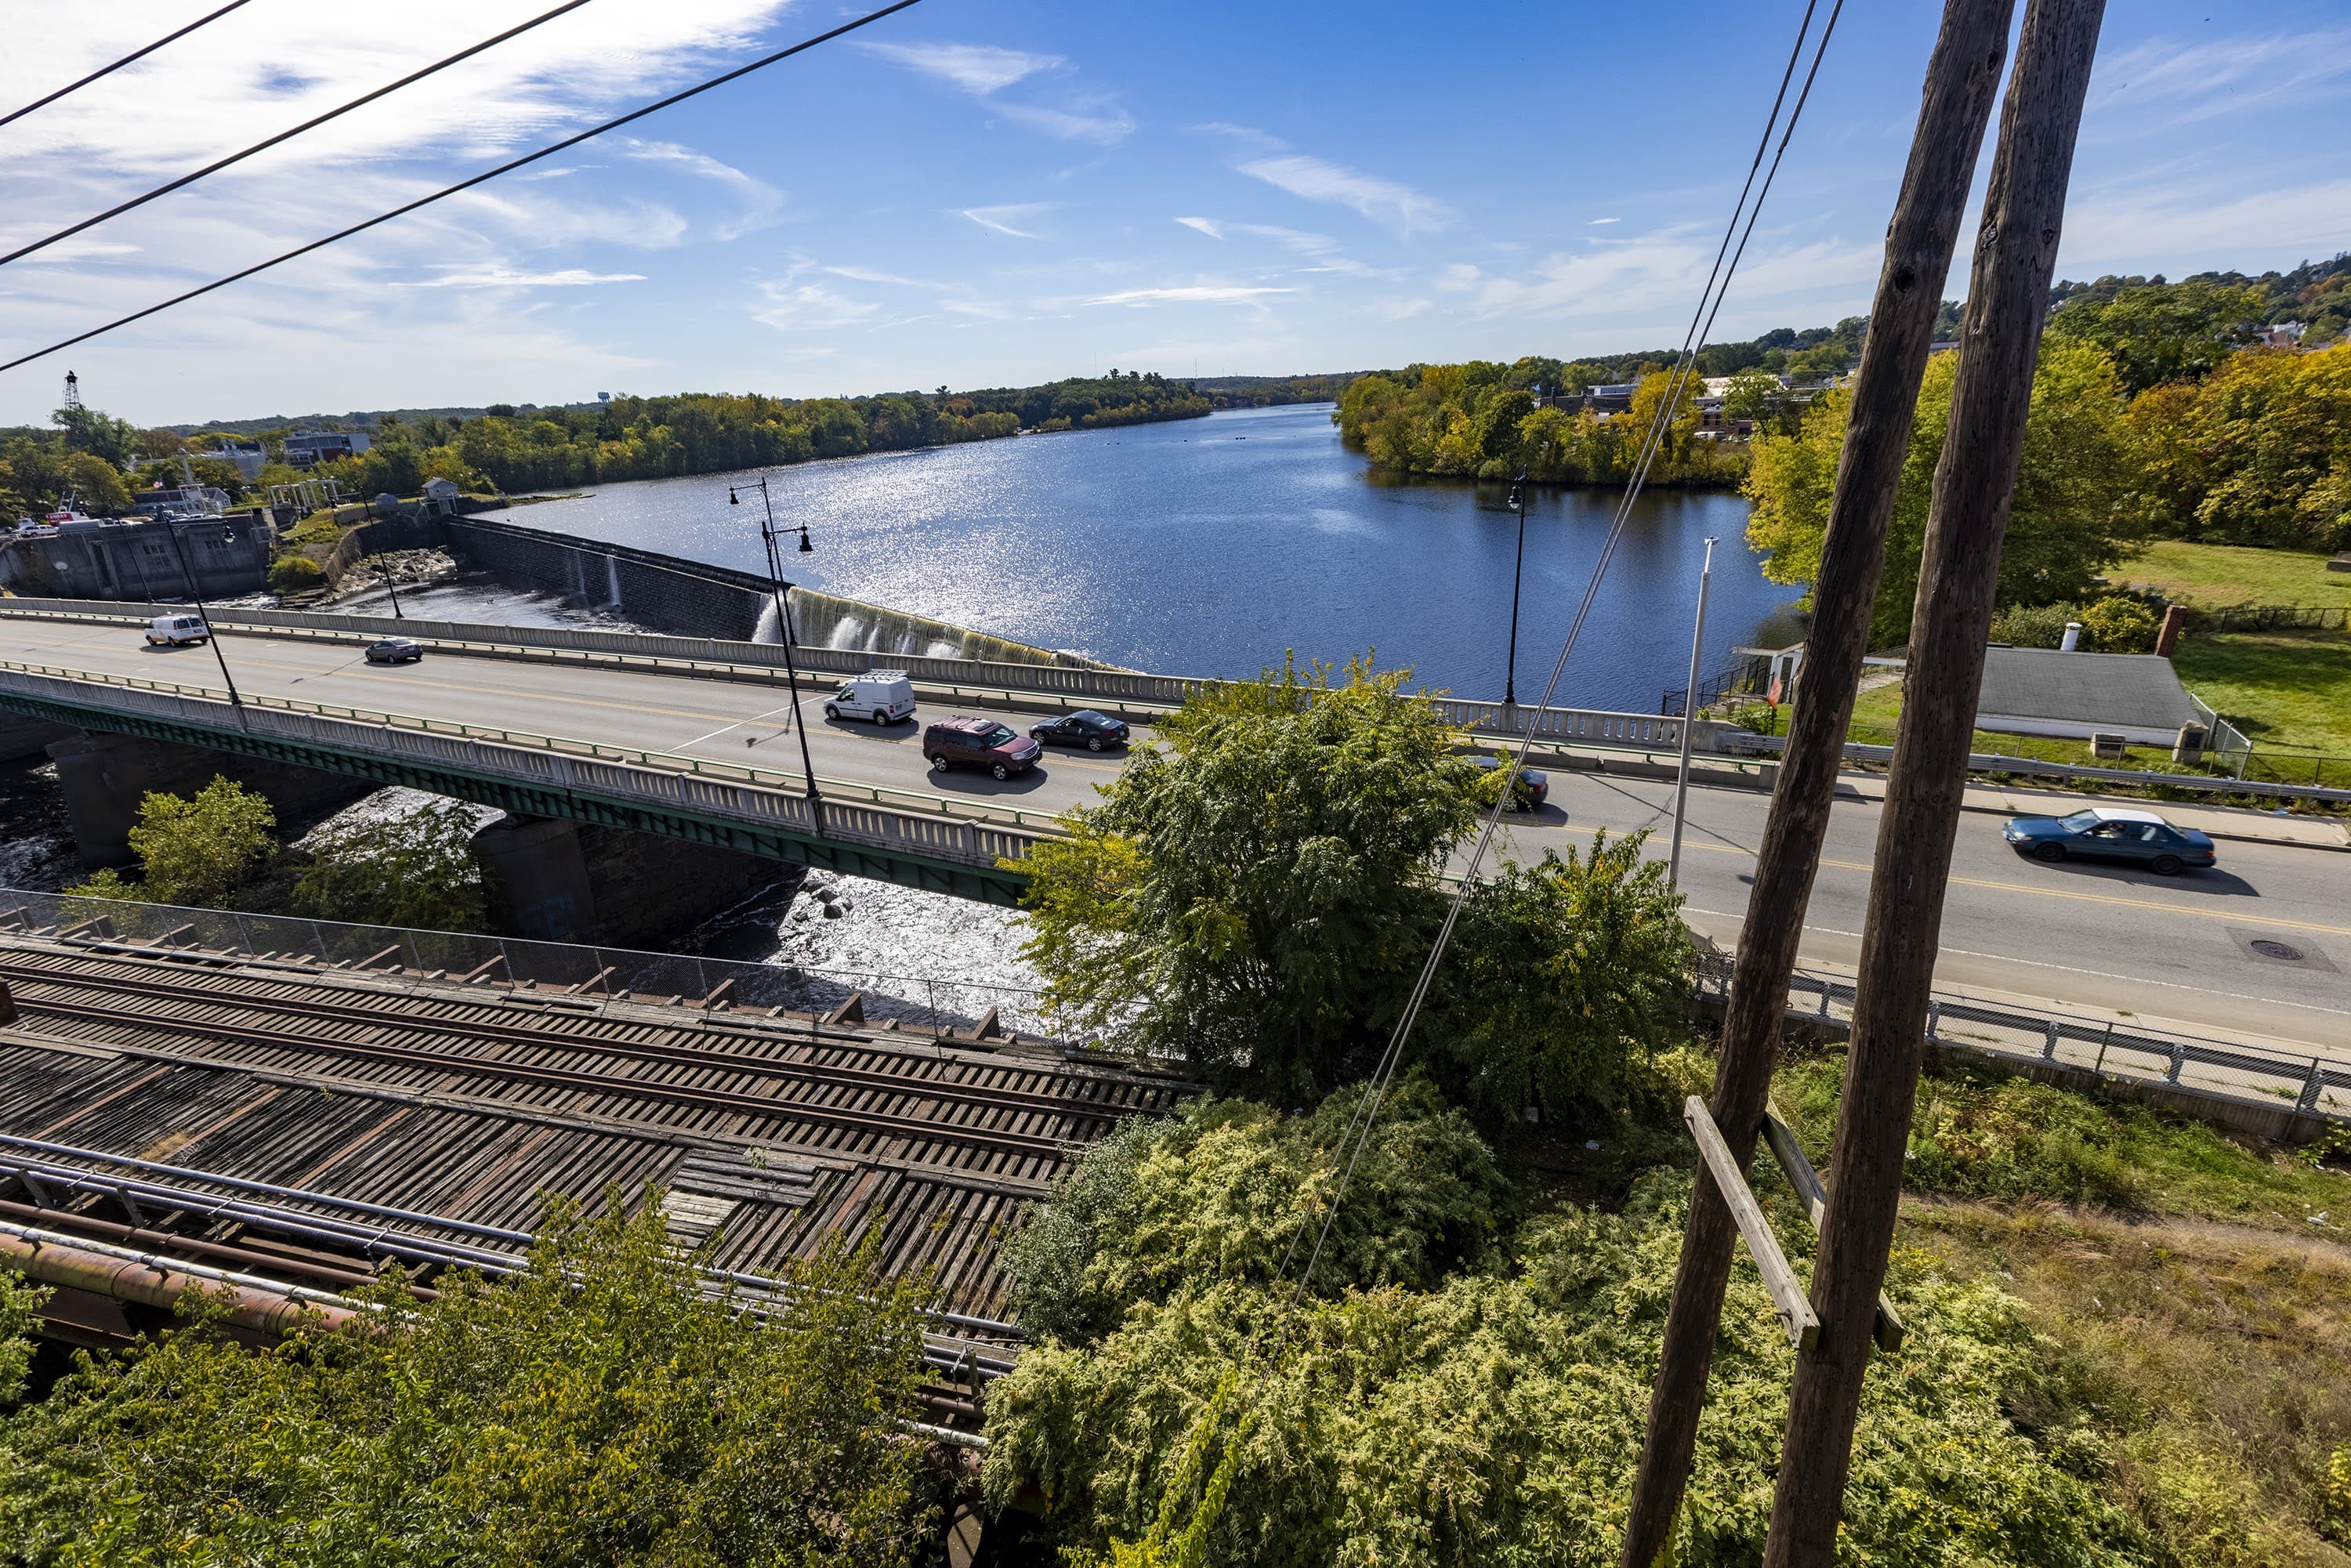 The Merrimack River runs over the Great Stone Dam and underneath Broadway in Lawrence. (Jesse Costa/WBUR)